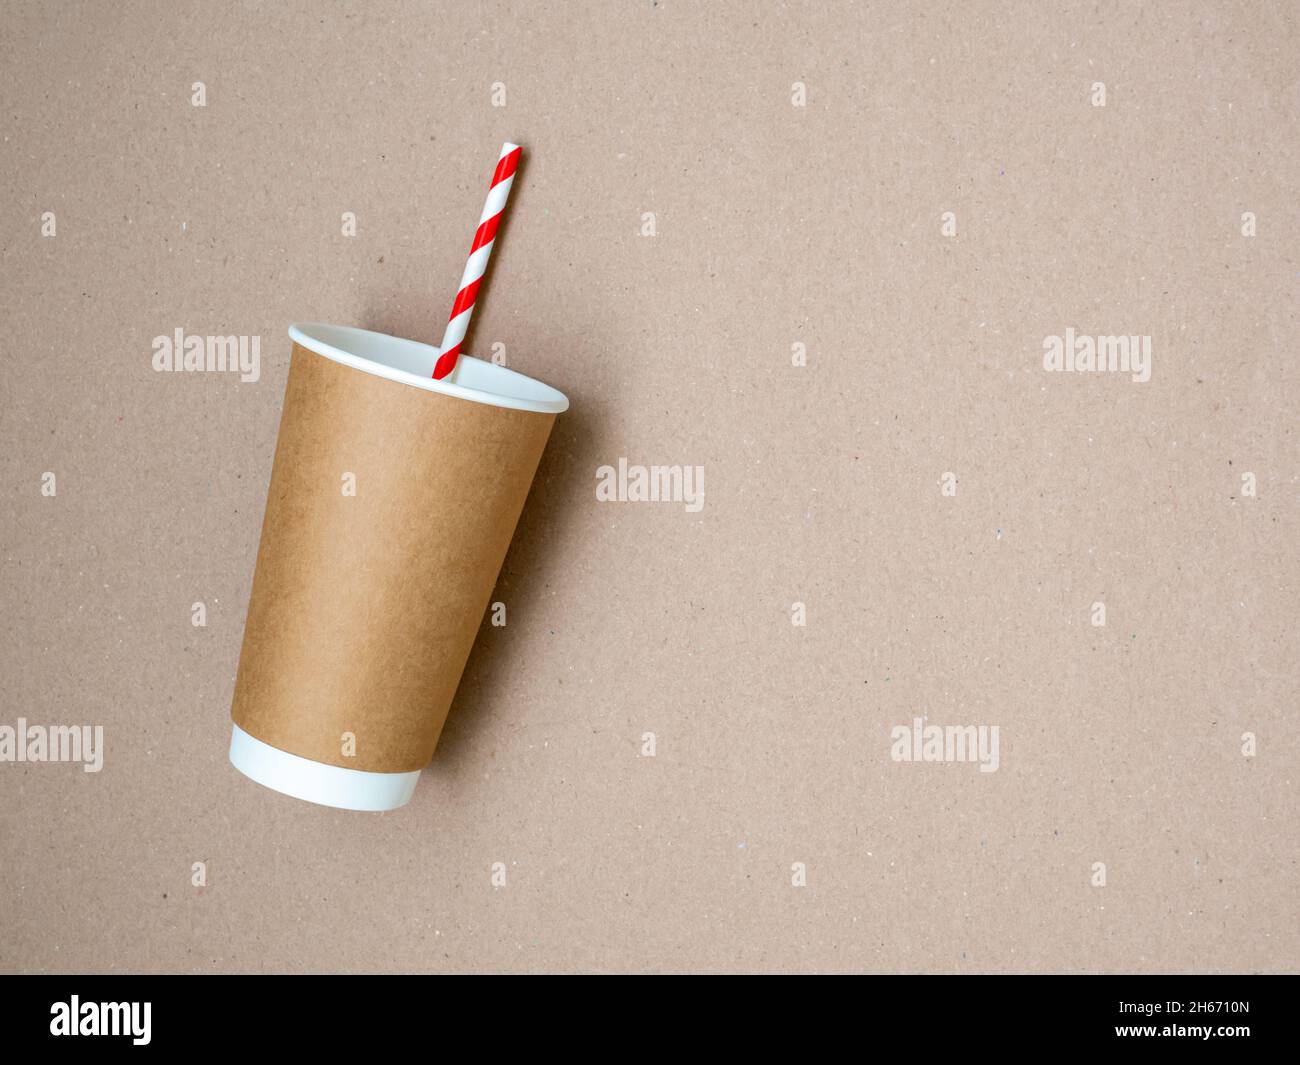 https://c8.alamy.com/comp/2H6710N/takeaway-coffee-mug-with-paper-white-and-red-drinking-straw-on-craft-paper-background-the-concept-of-a-world-without-plastic-and-a-clean-planet-2H6710N.jpg